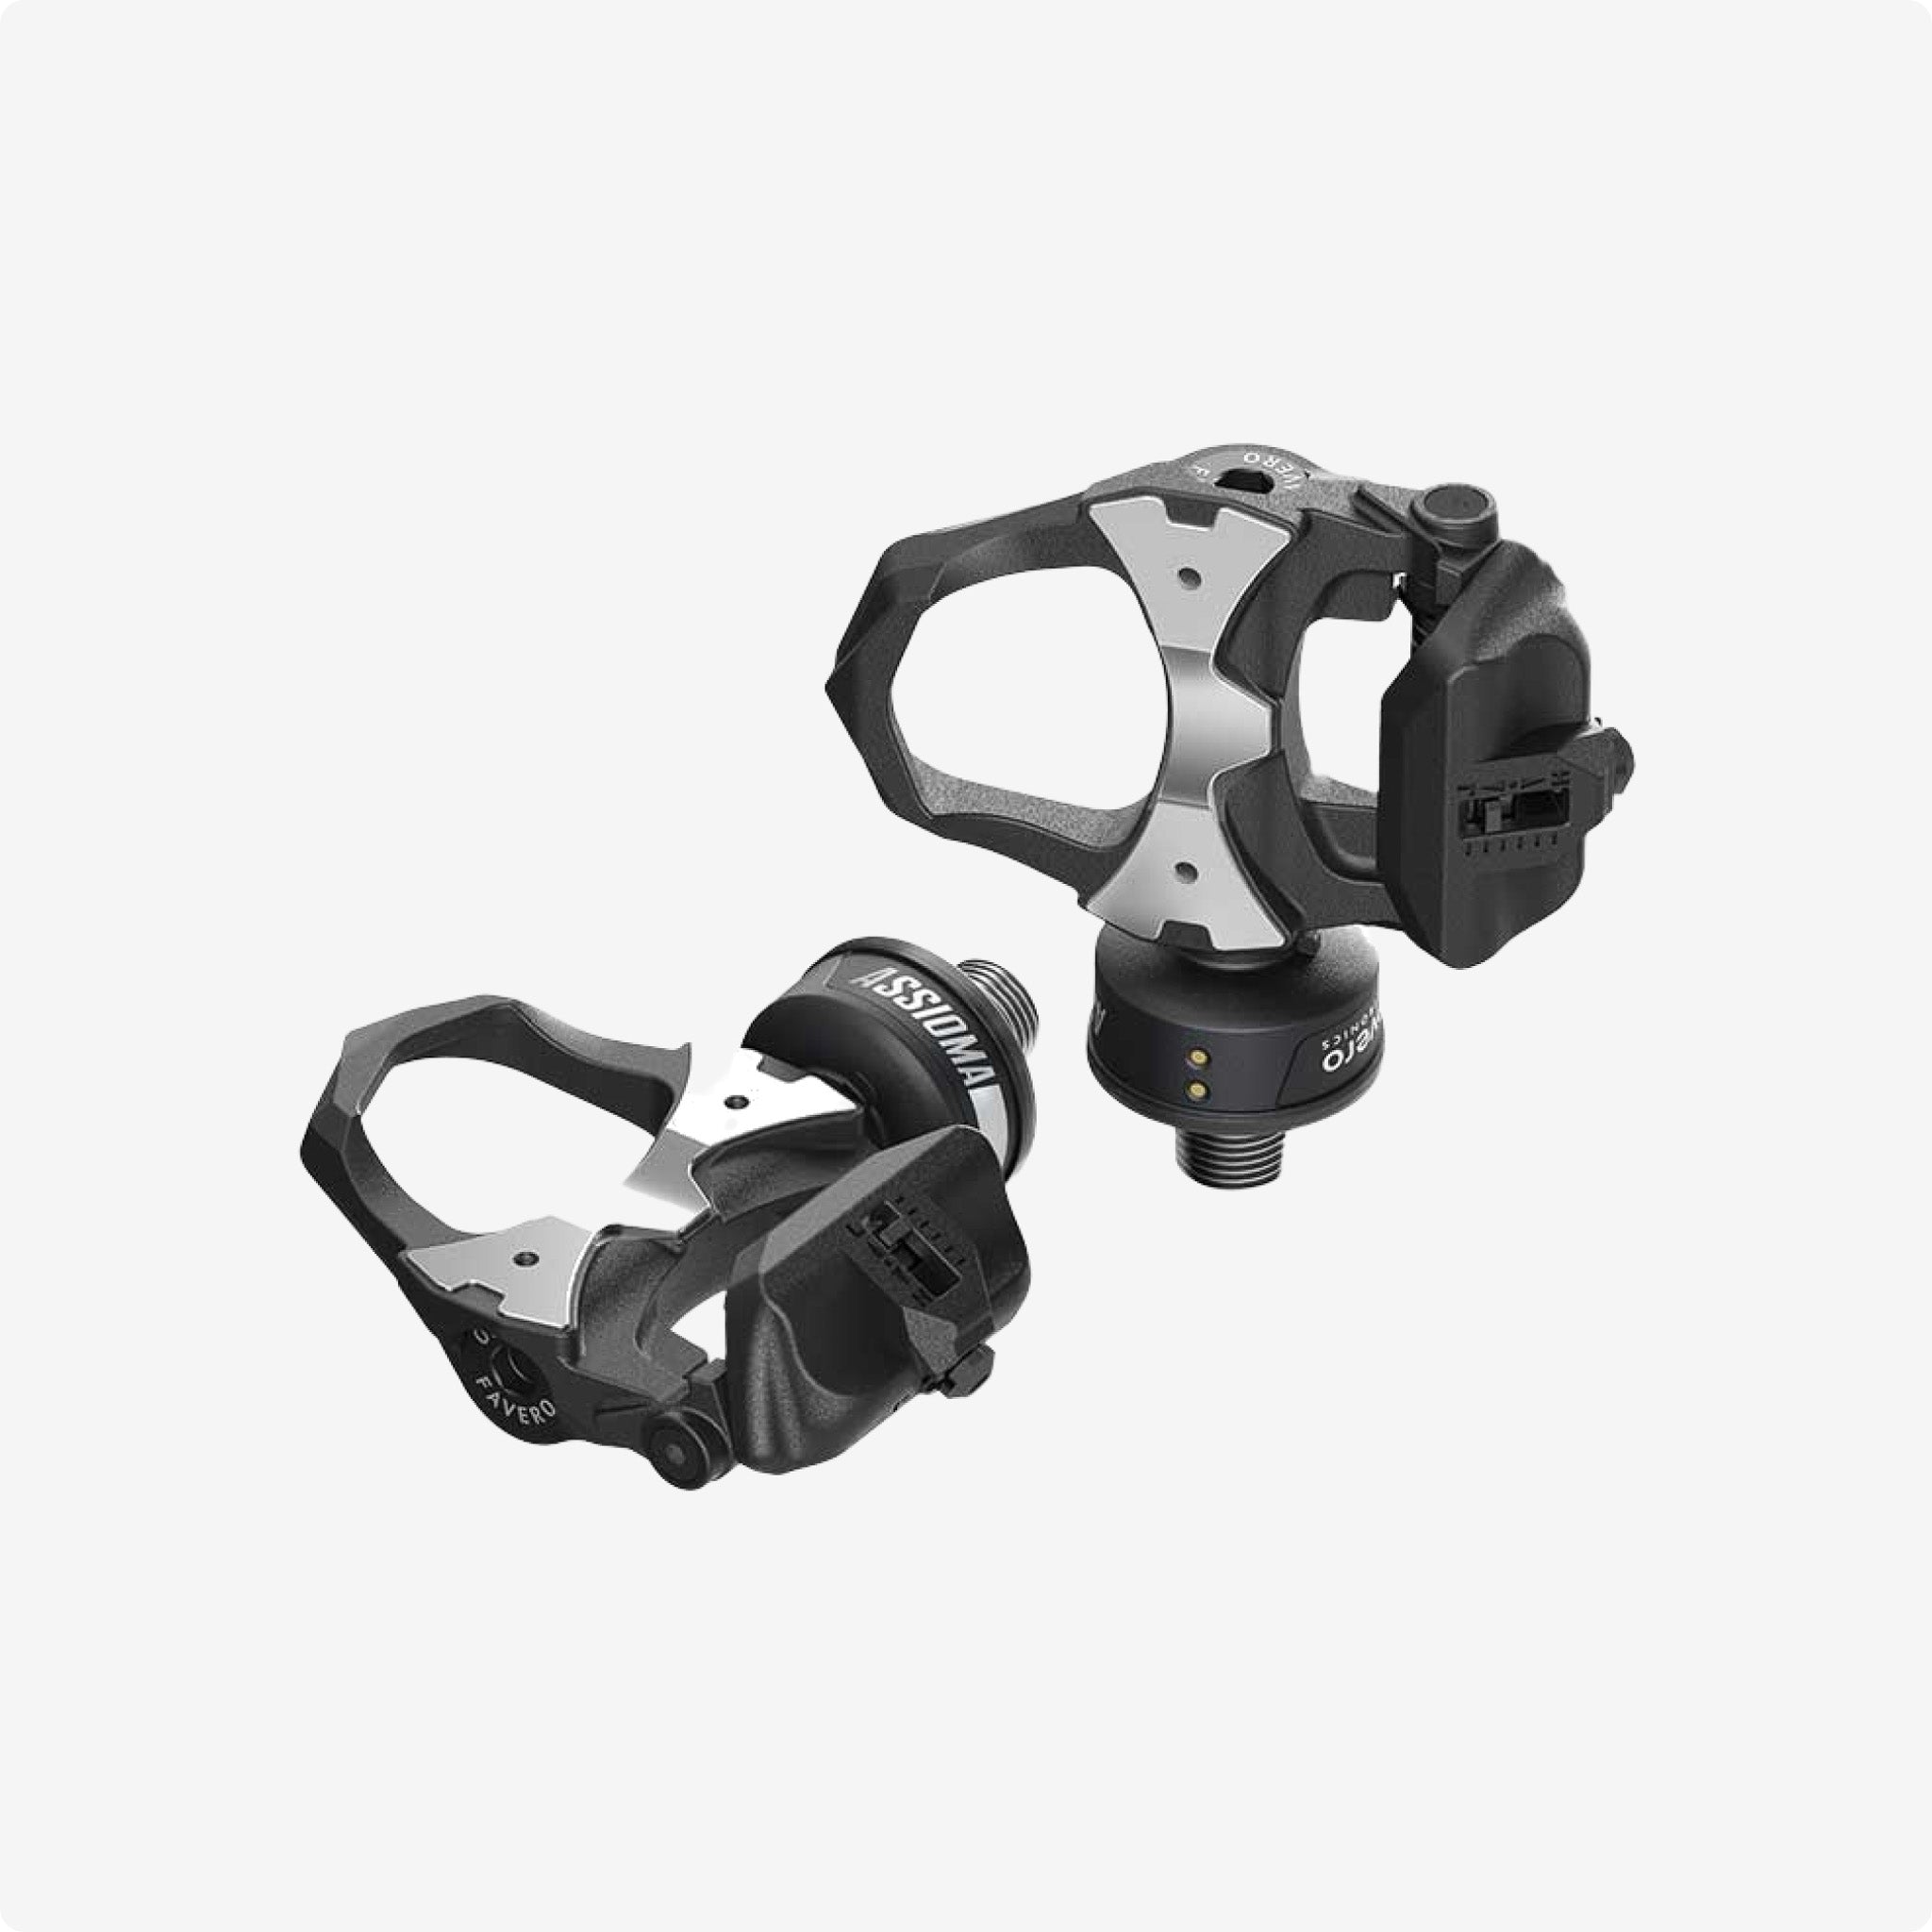 Pair of Favero black and silver cycling clip-in power meter pedals, showcasing advanced technology for performance enhancement @ Bici.